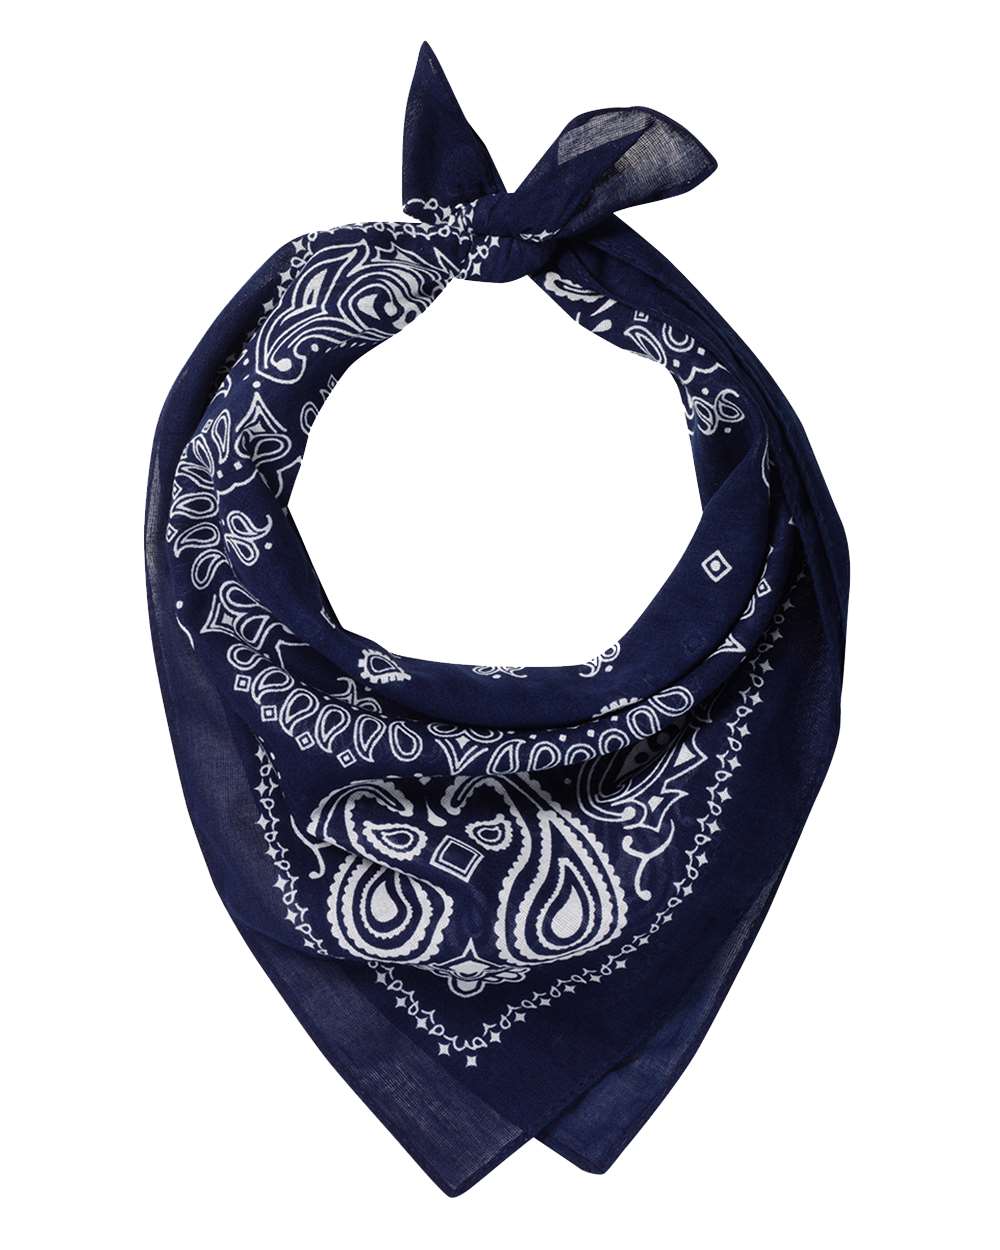 The Best Quality Bandanas for the Modern Trendsetter | 2.5 oz, 100% cotton sheeting | Affordable, Stylish, Multi-functional Bandana Crafts | Elevate Your Look with our Premium Bandanas